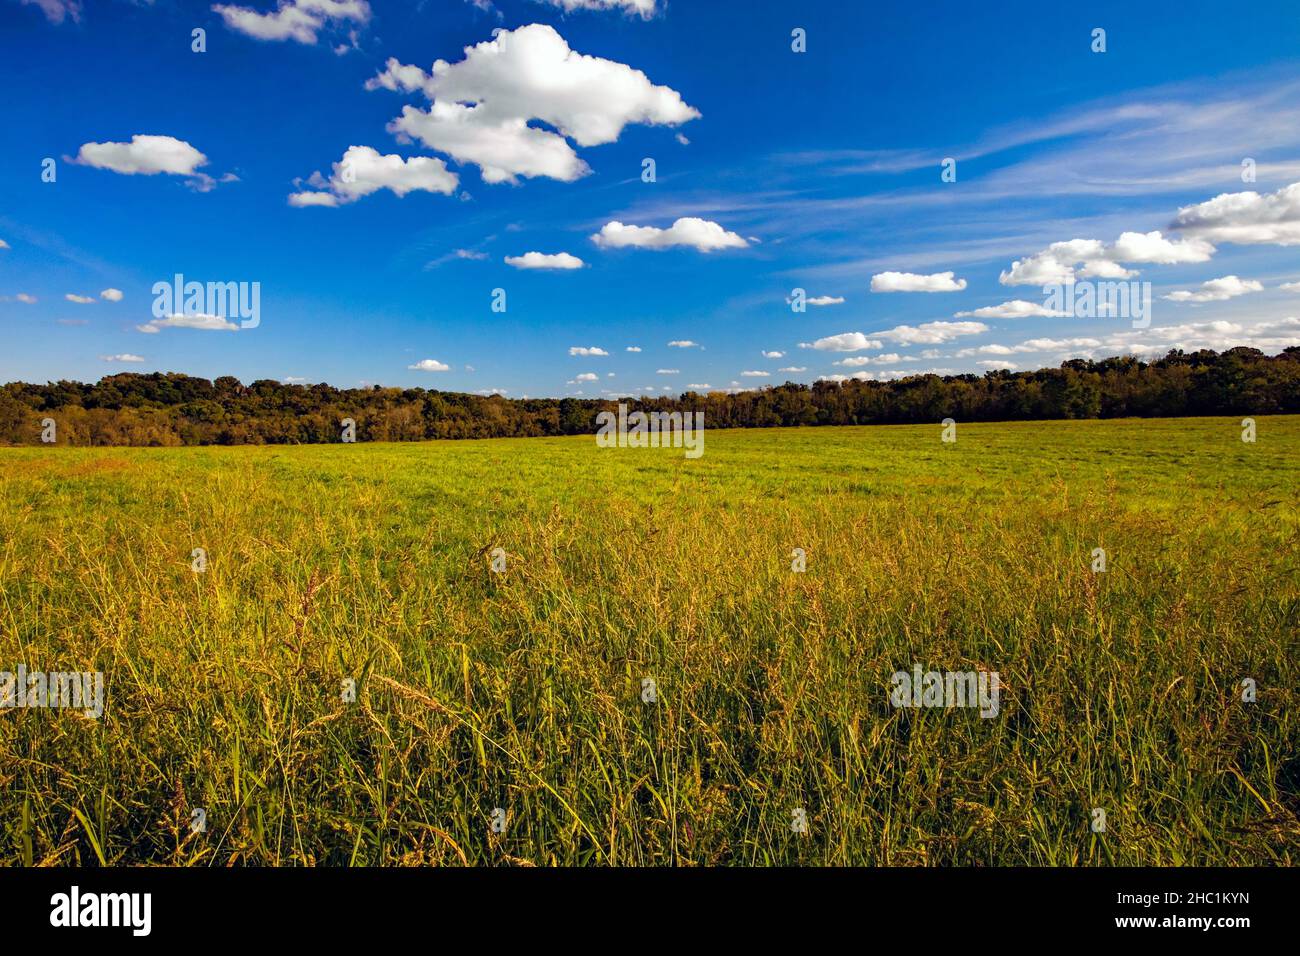 Grasslands at Tyler State Park , Pennsylvania provide valuable vanishing habitat for serverl grassland species of birds many of which are in decline. Stock Photo